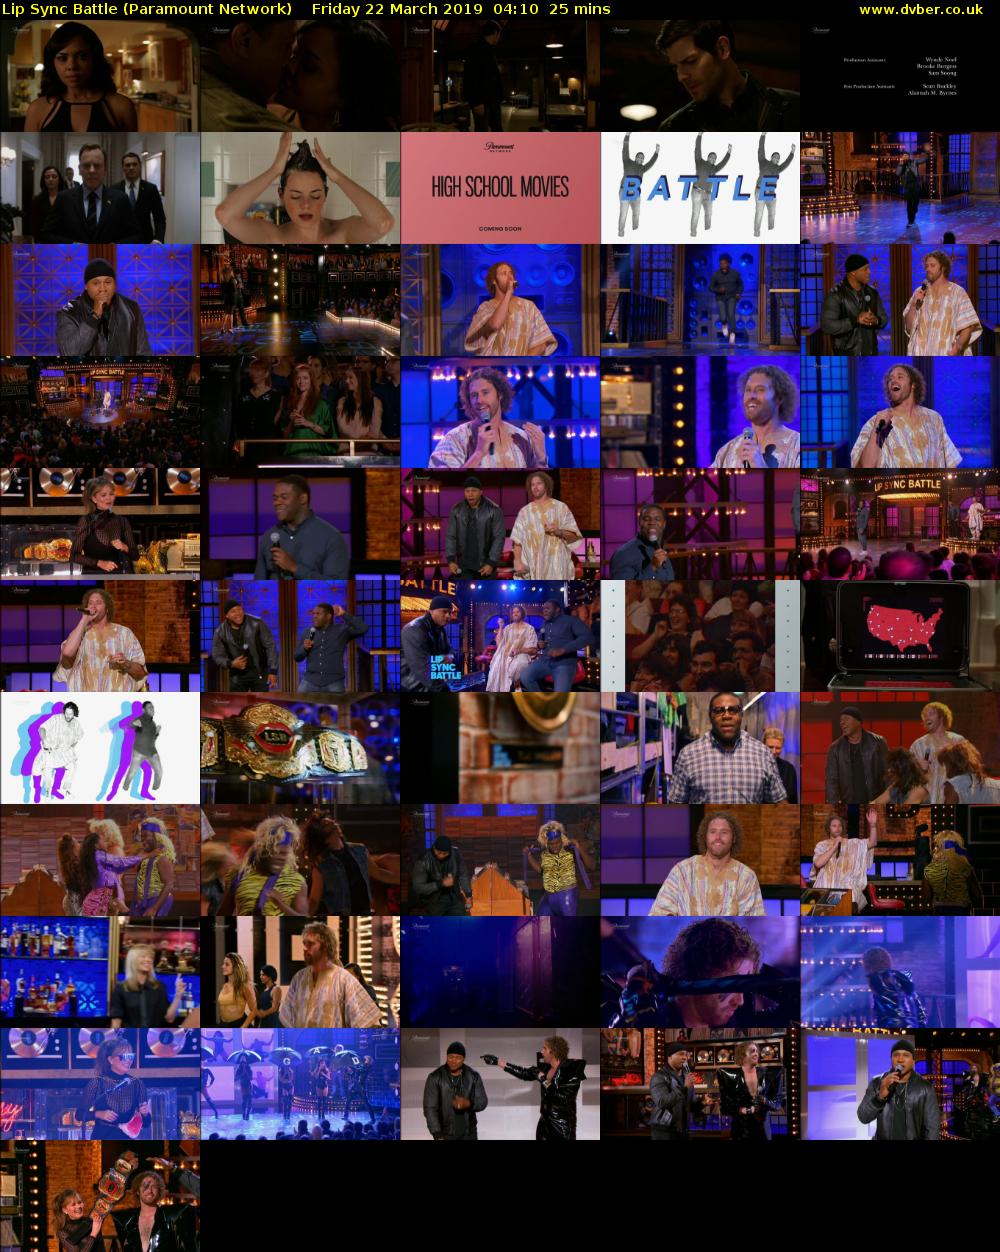 Lip Sync Battle (Paramount Network) Friday 22 March 2019 04:10 - 04:35